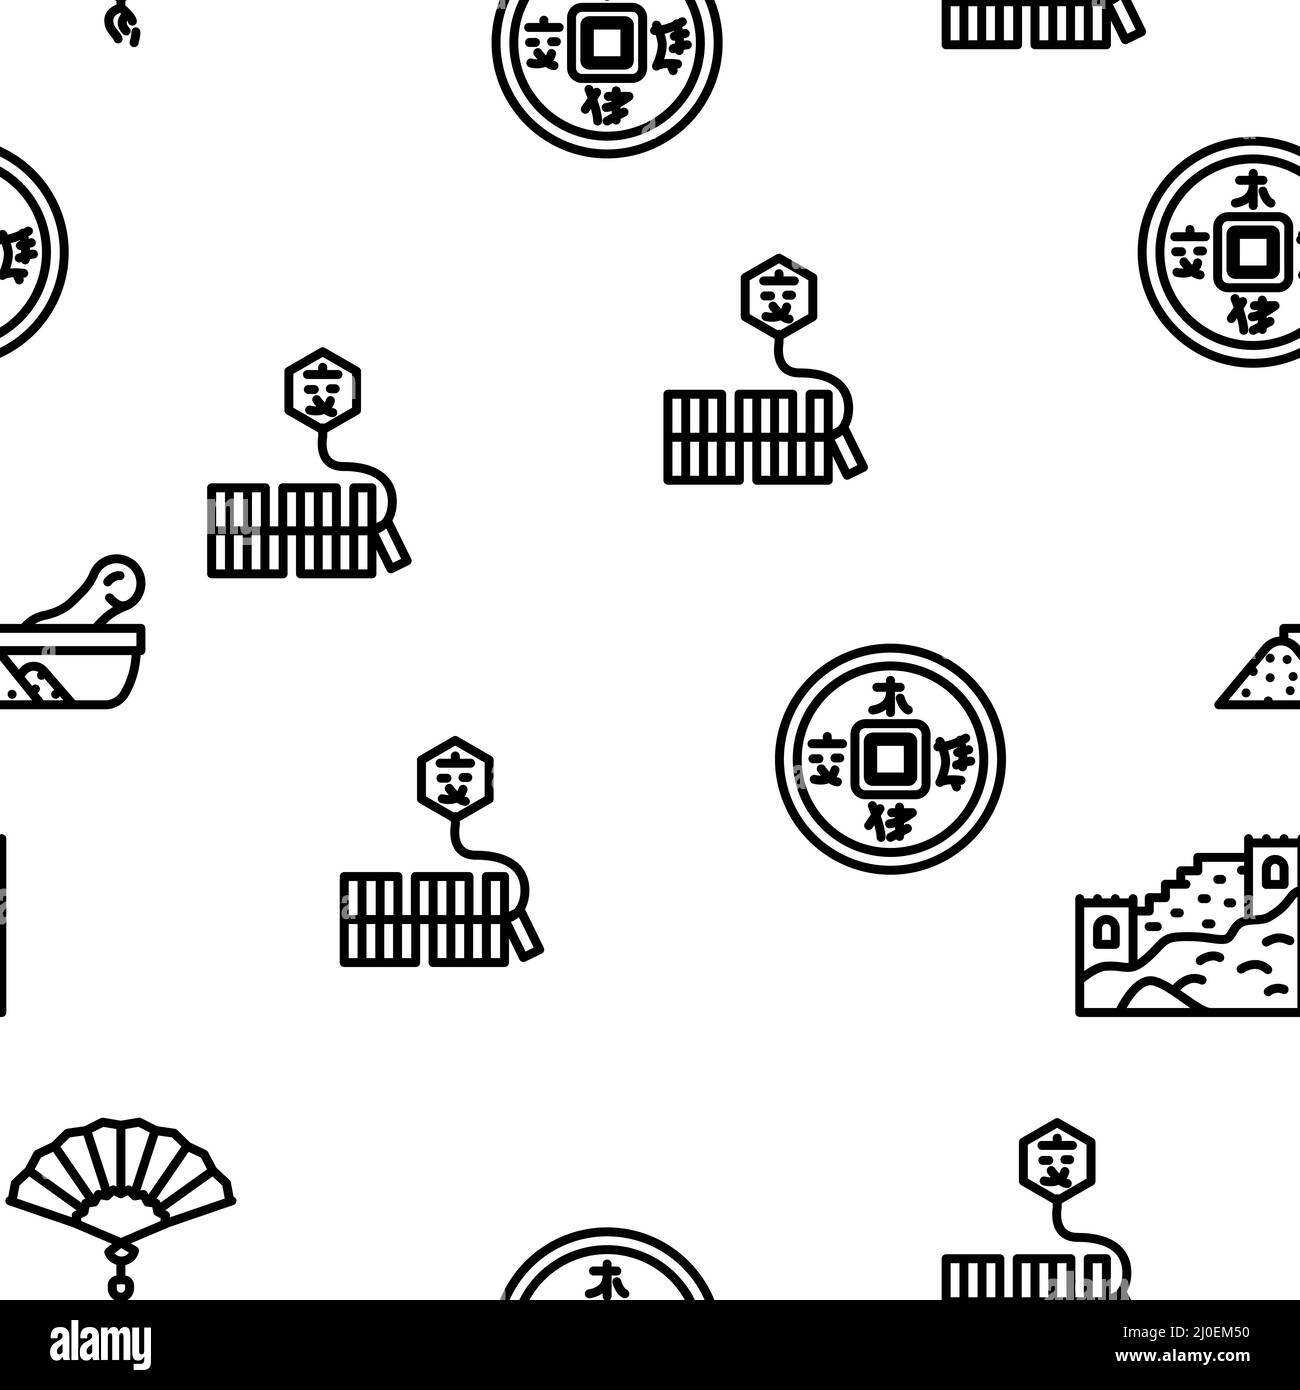 Chinese Accessory And Tradition Vector Seamless Pattern Stock Vector